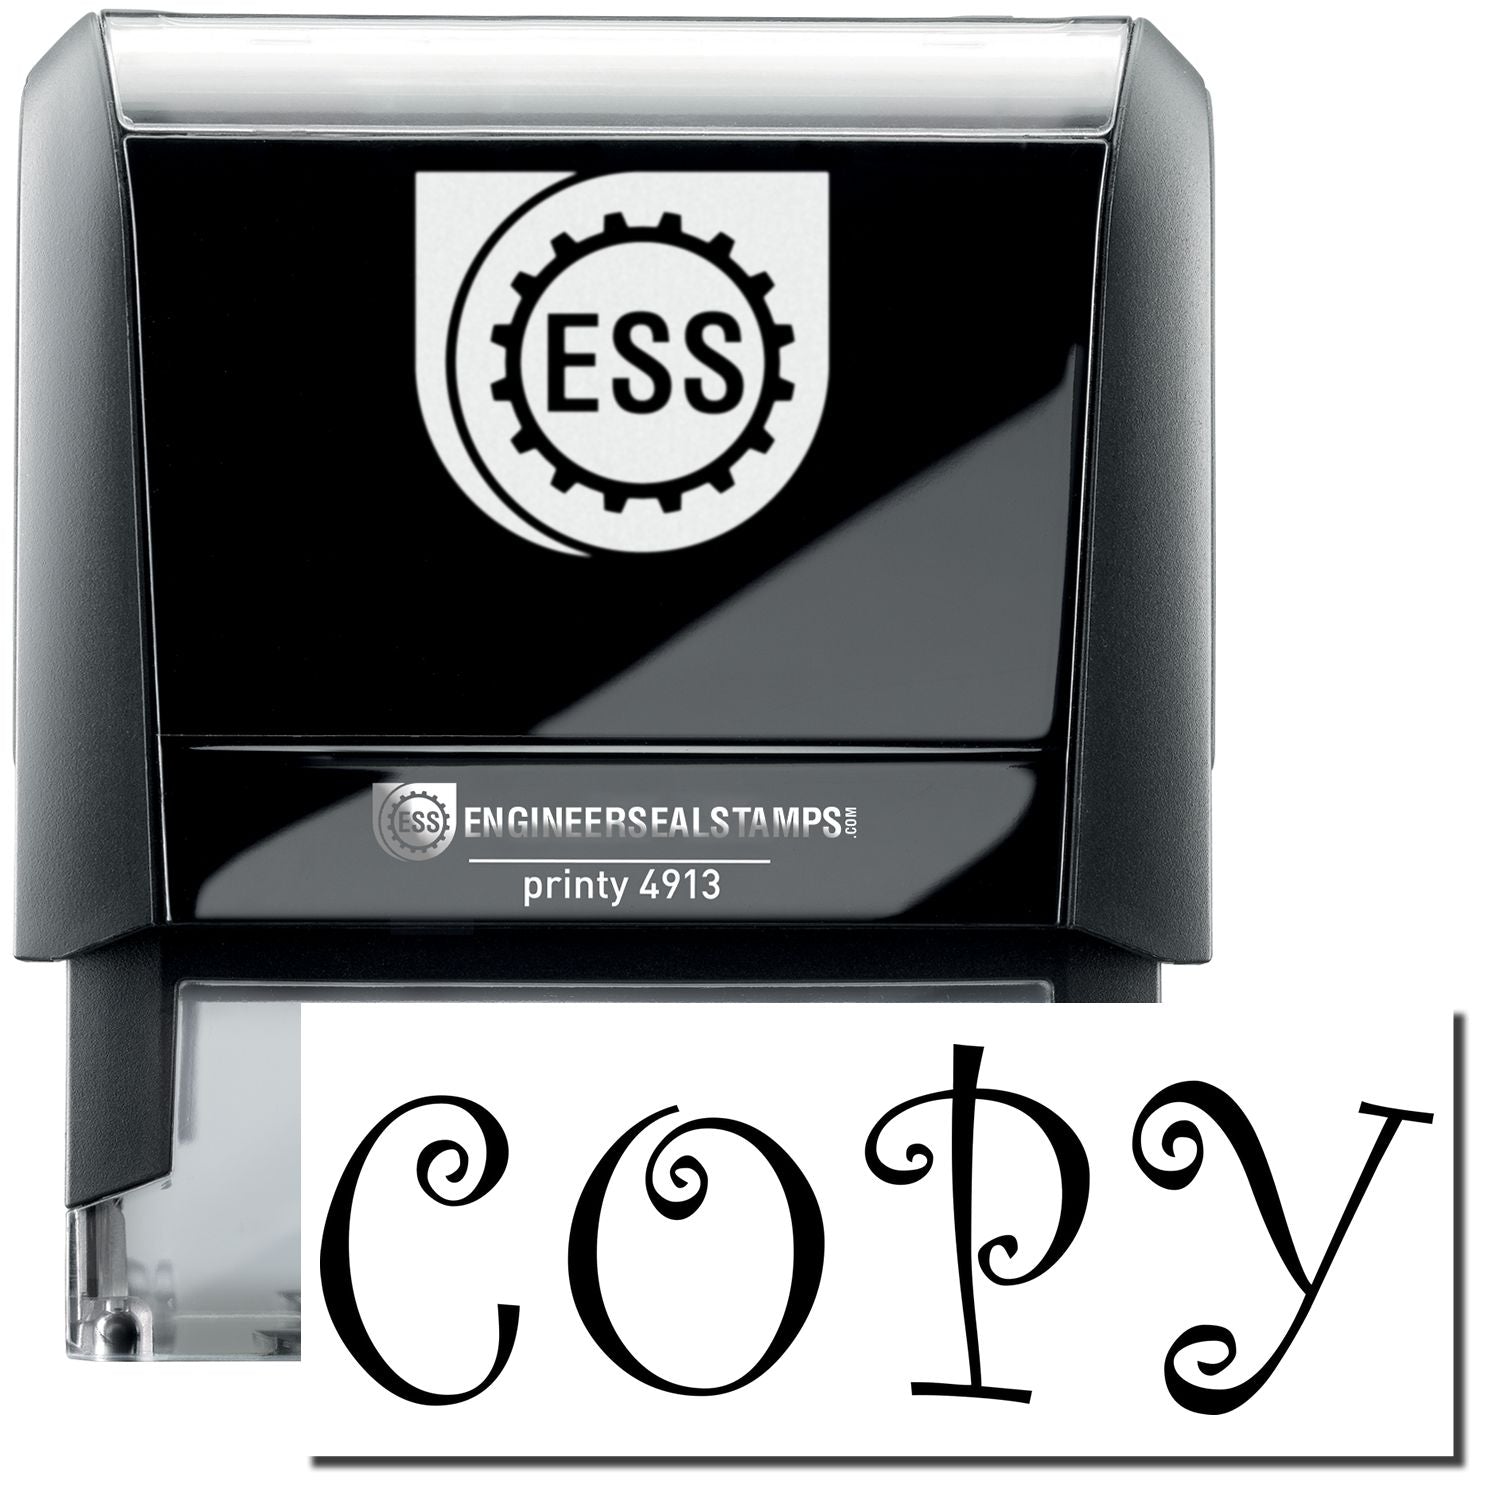 A self-inking stamp with a stamped image showing how the text "COPY" in a large distinguishing curly font is displayed by it after stamping.